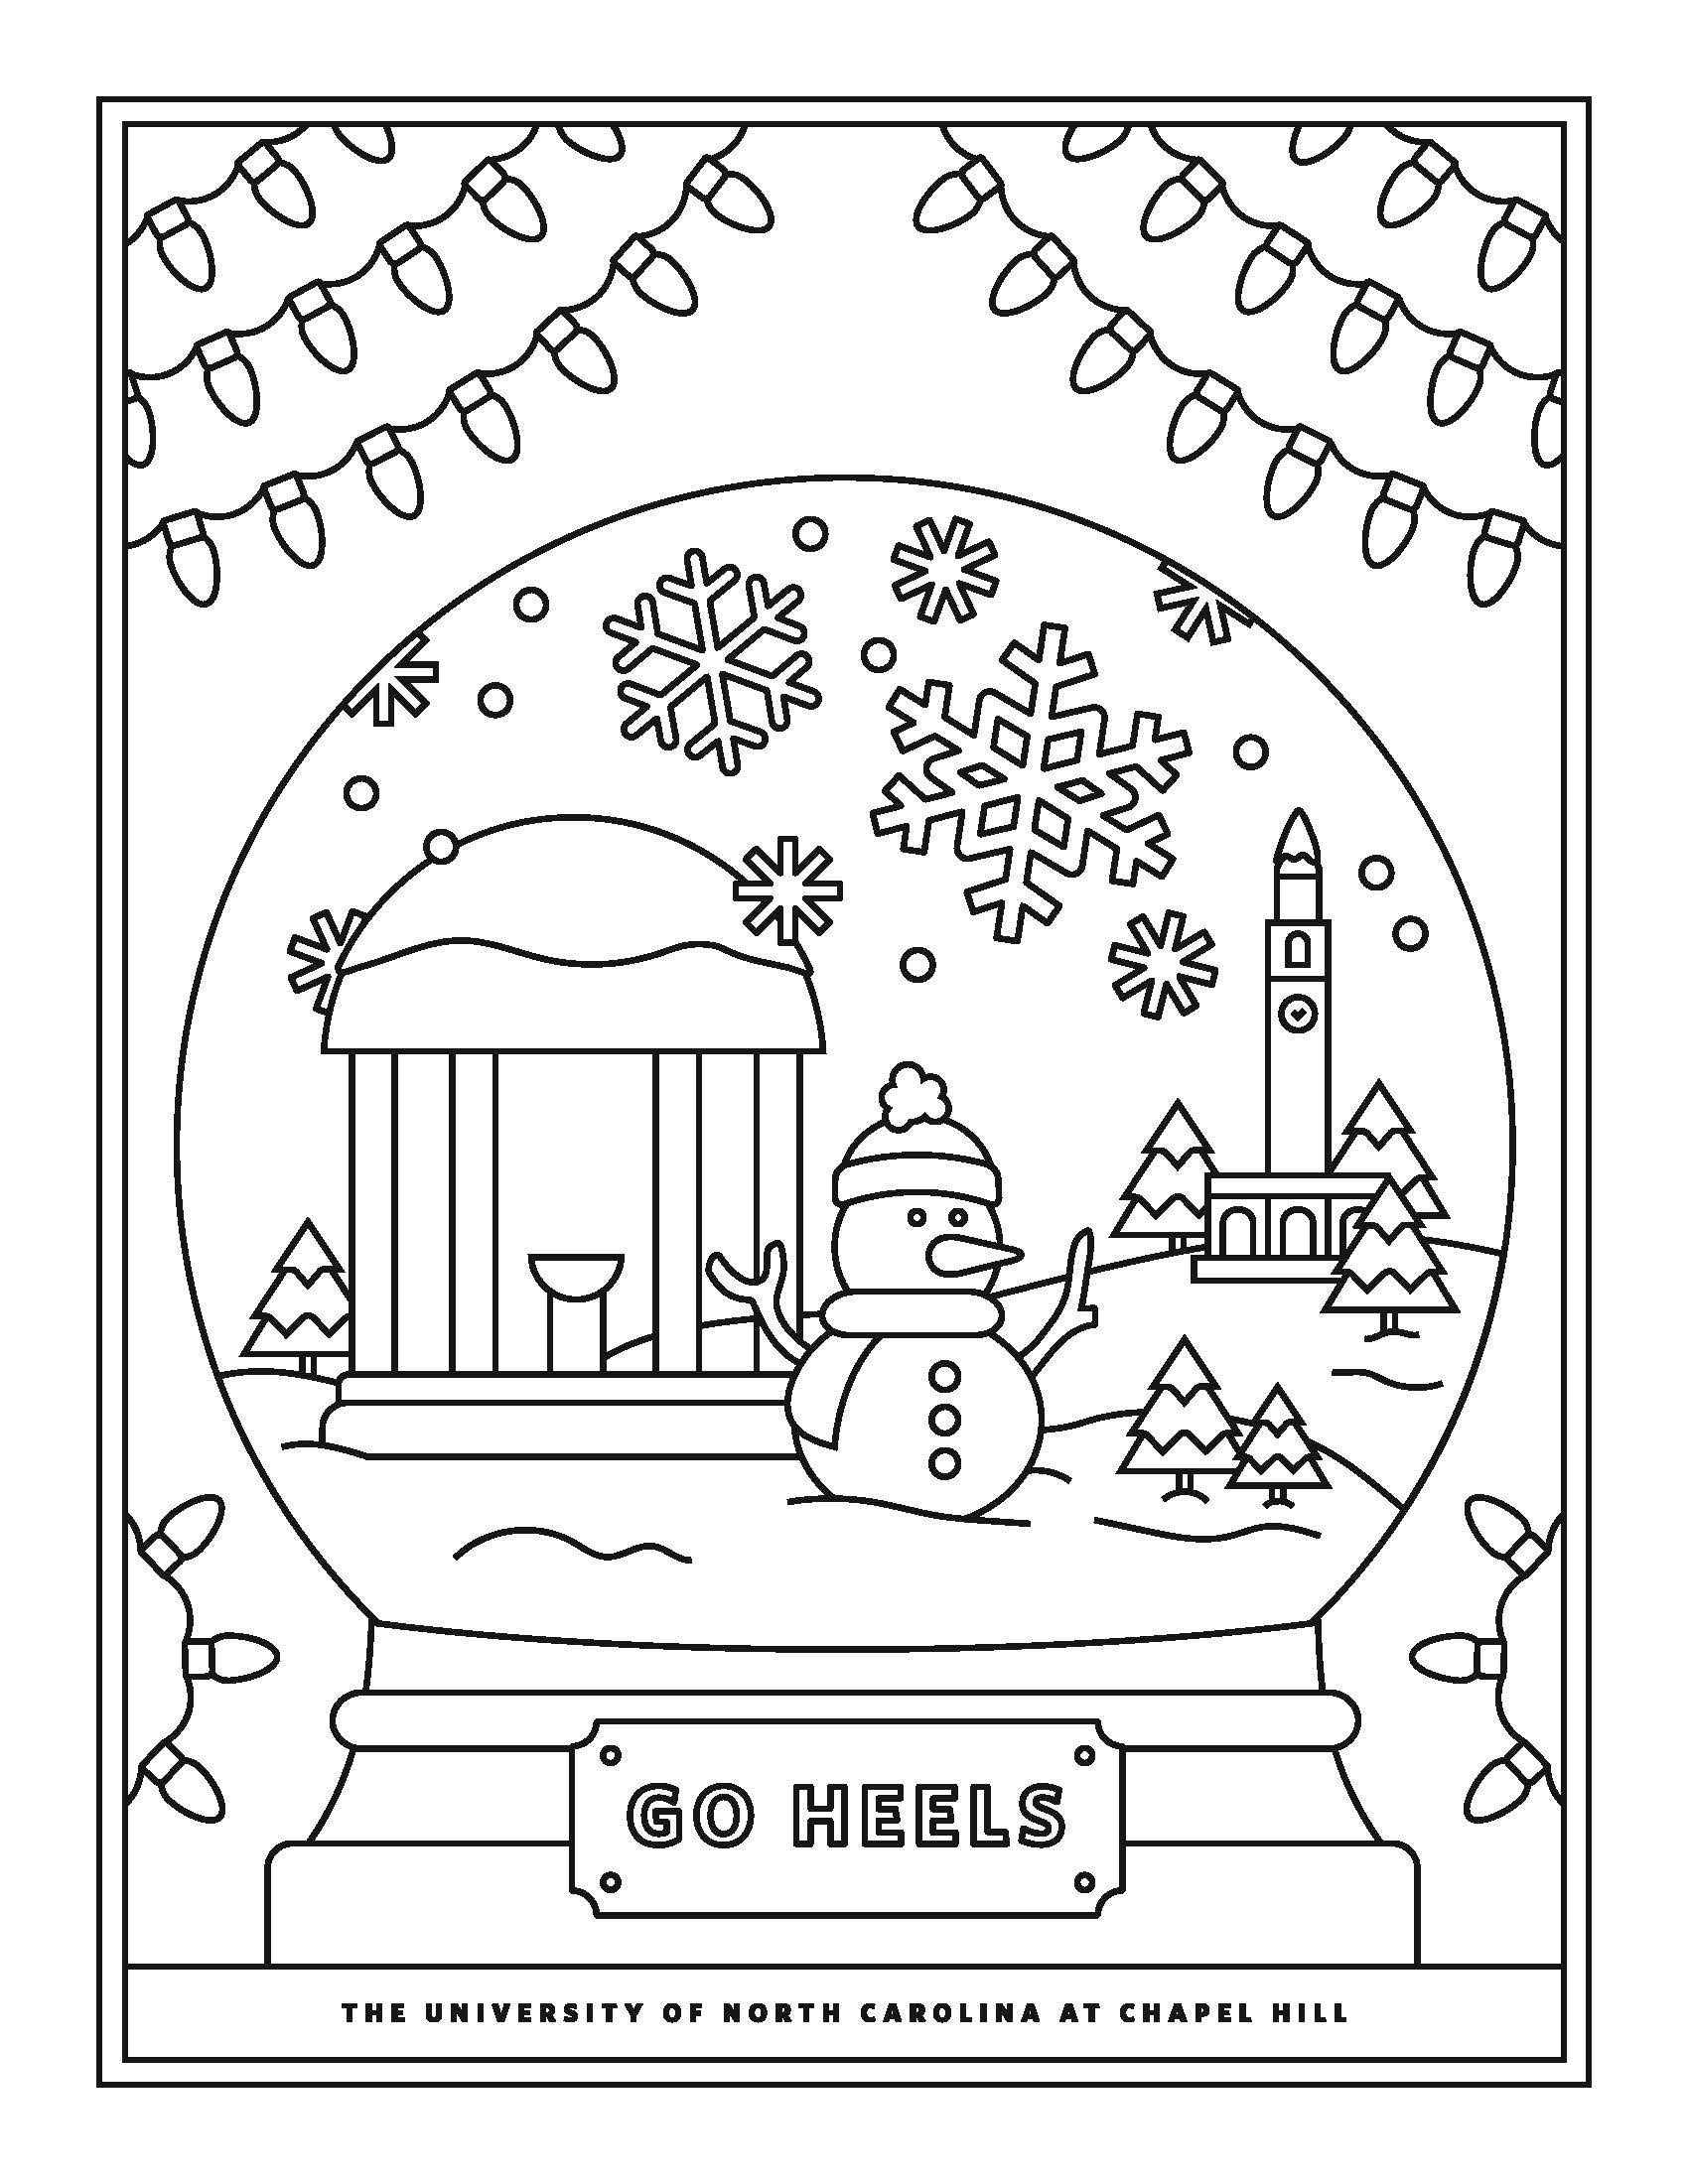 A coloring page of a snowglobe with a snowman and Old Well inside.